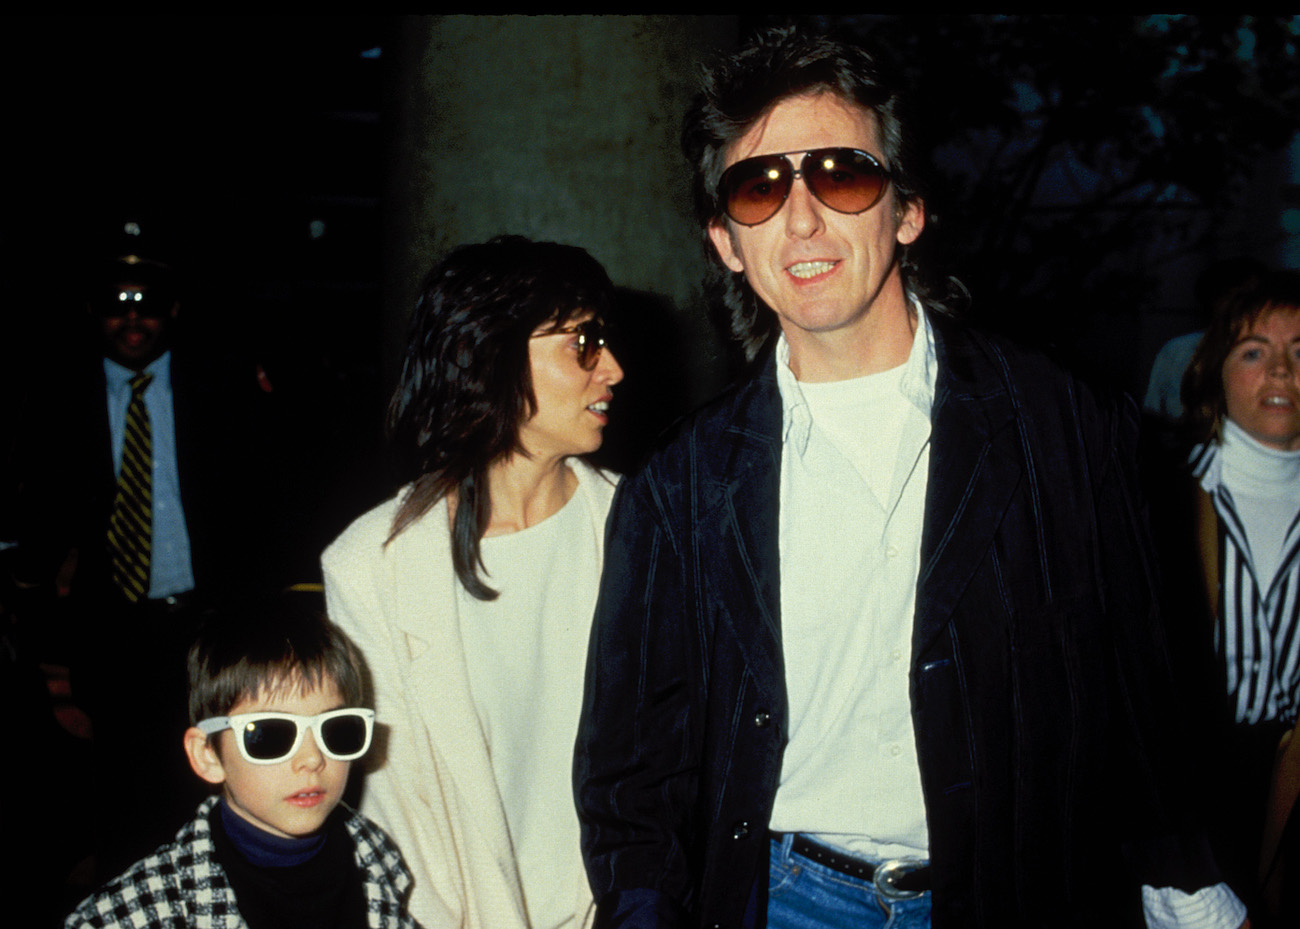 George Harrison and his wife Olivia and their son Dhani at LAX Airport in 1988.